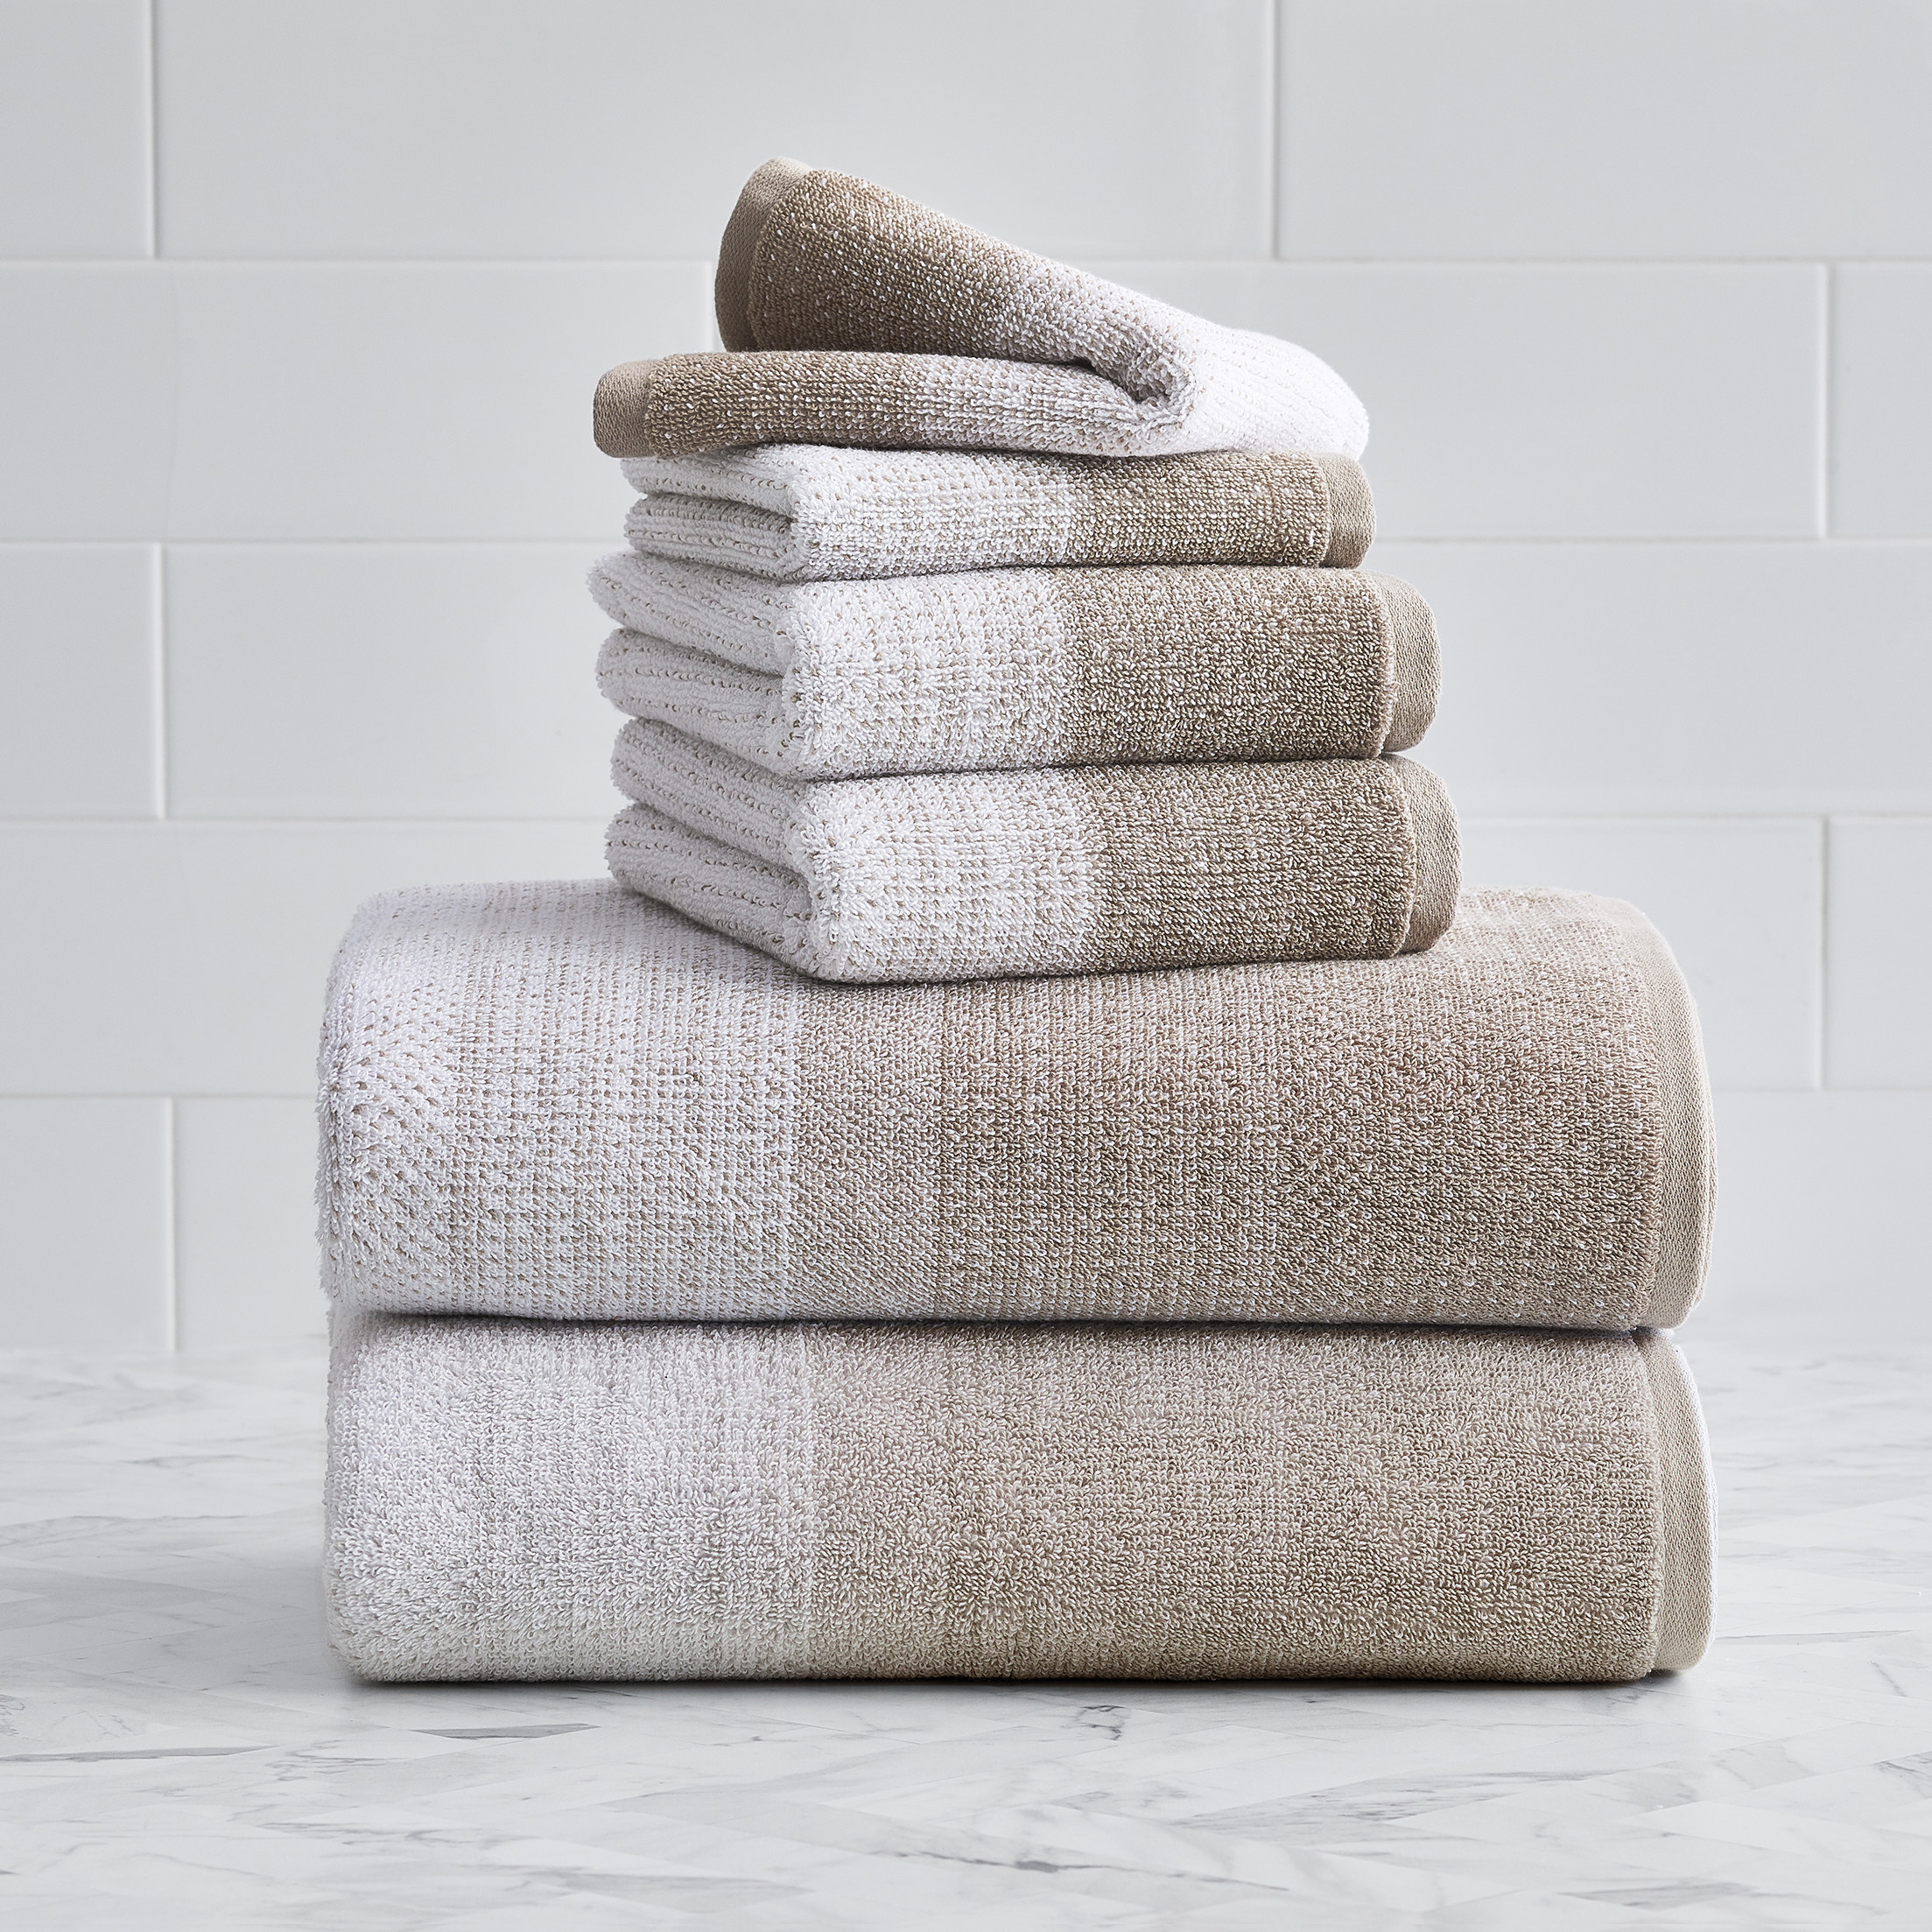 The towels in the color Taupe Splash Ombre